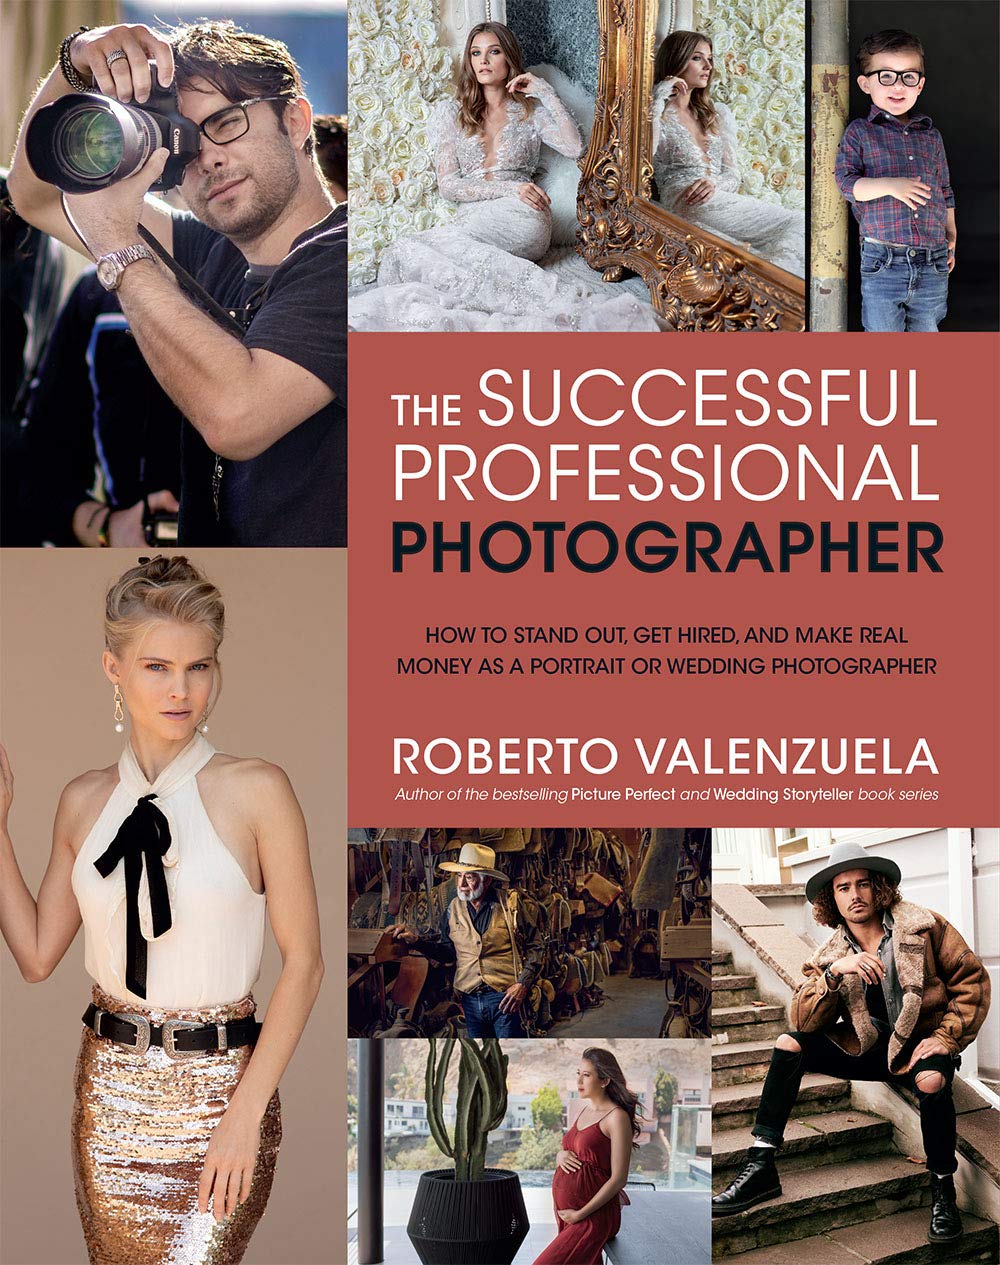 The Successful Professional Photographer